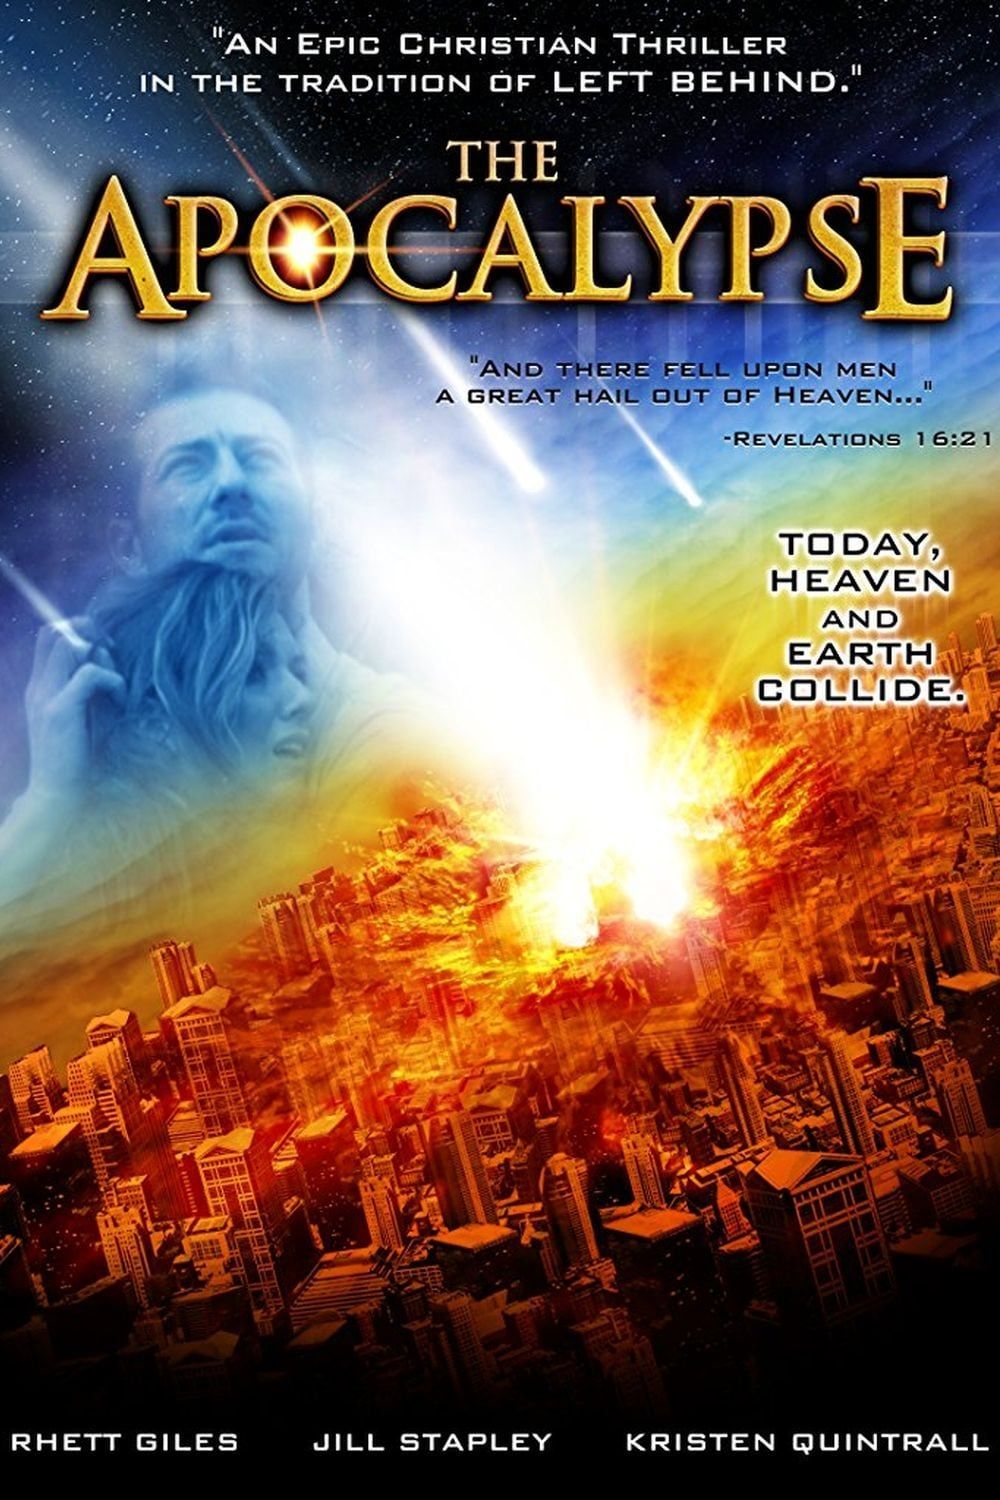 alexandre dubsky recommends apocalypse full movie online pic